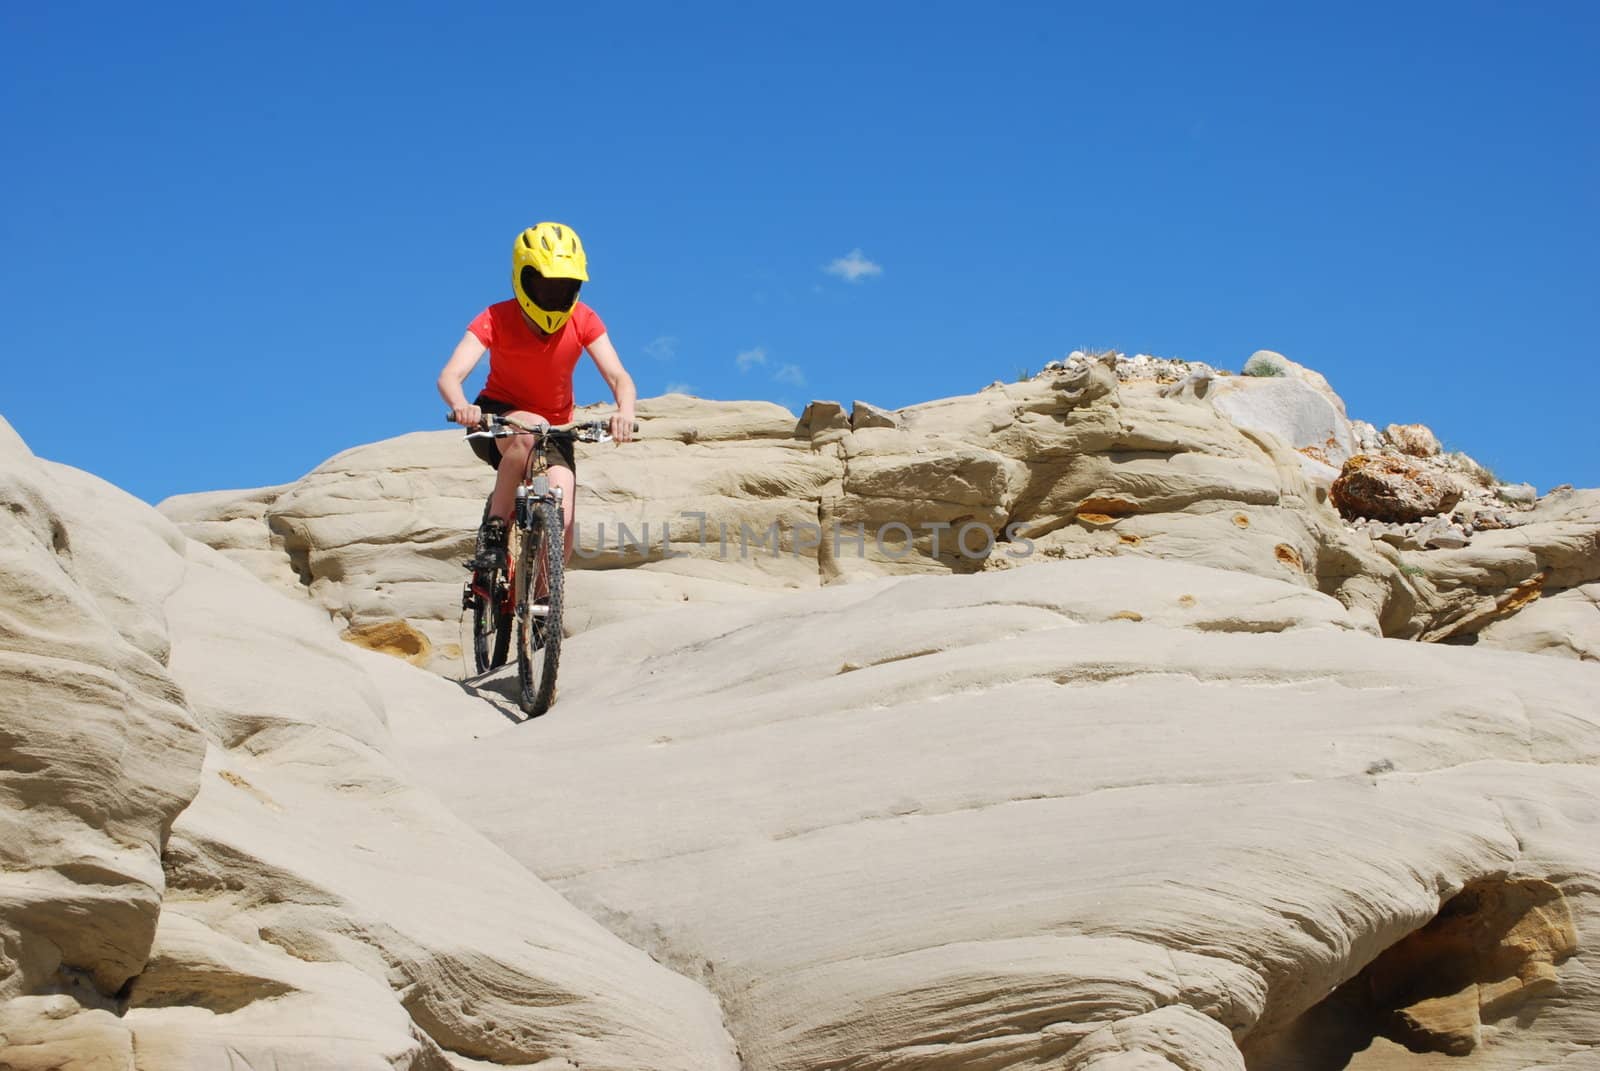 Mountain biker in red and orange against boulders and blue sky.